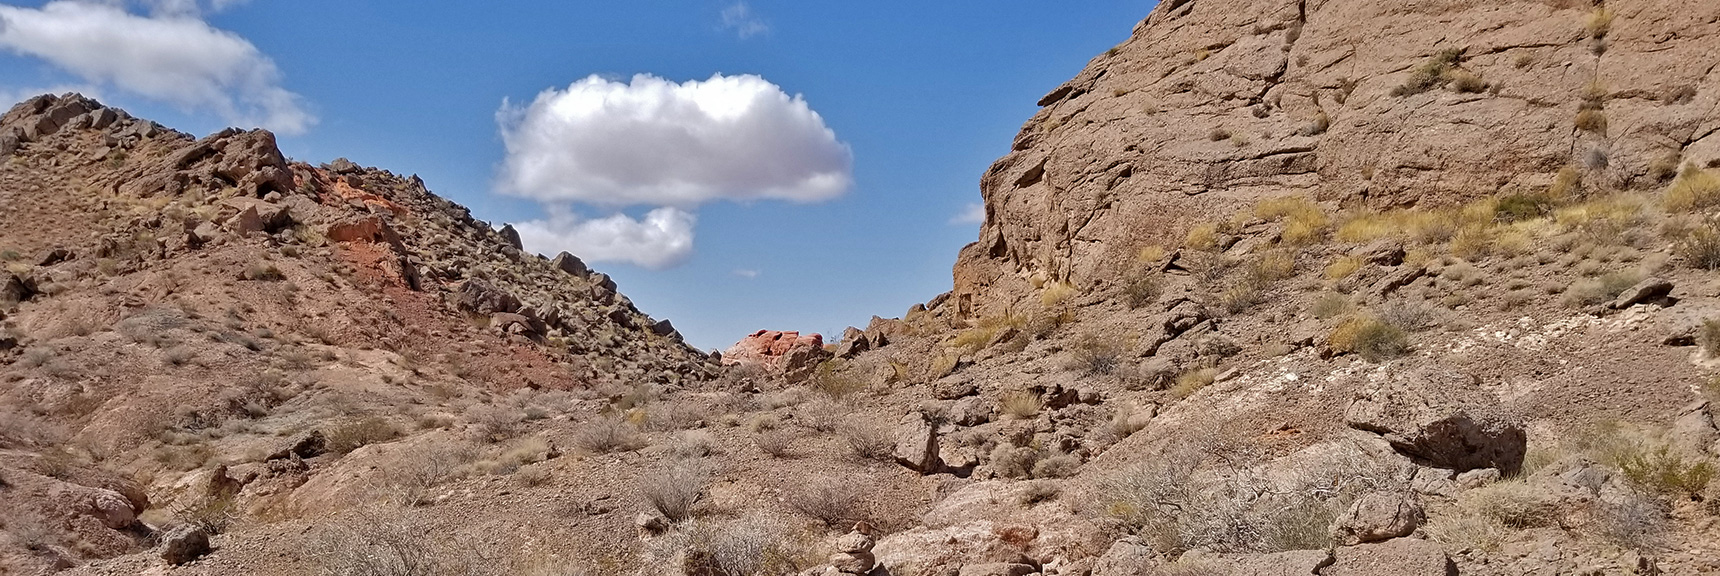 Ridge Saddle Opening to Northern Bowl of Fire | Northern Bowl of Fire | Lake Mead National Recreation Area, Nevada